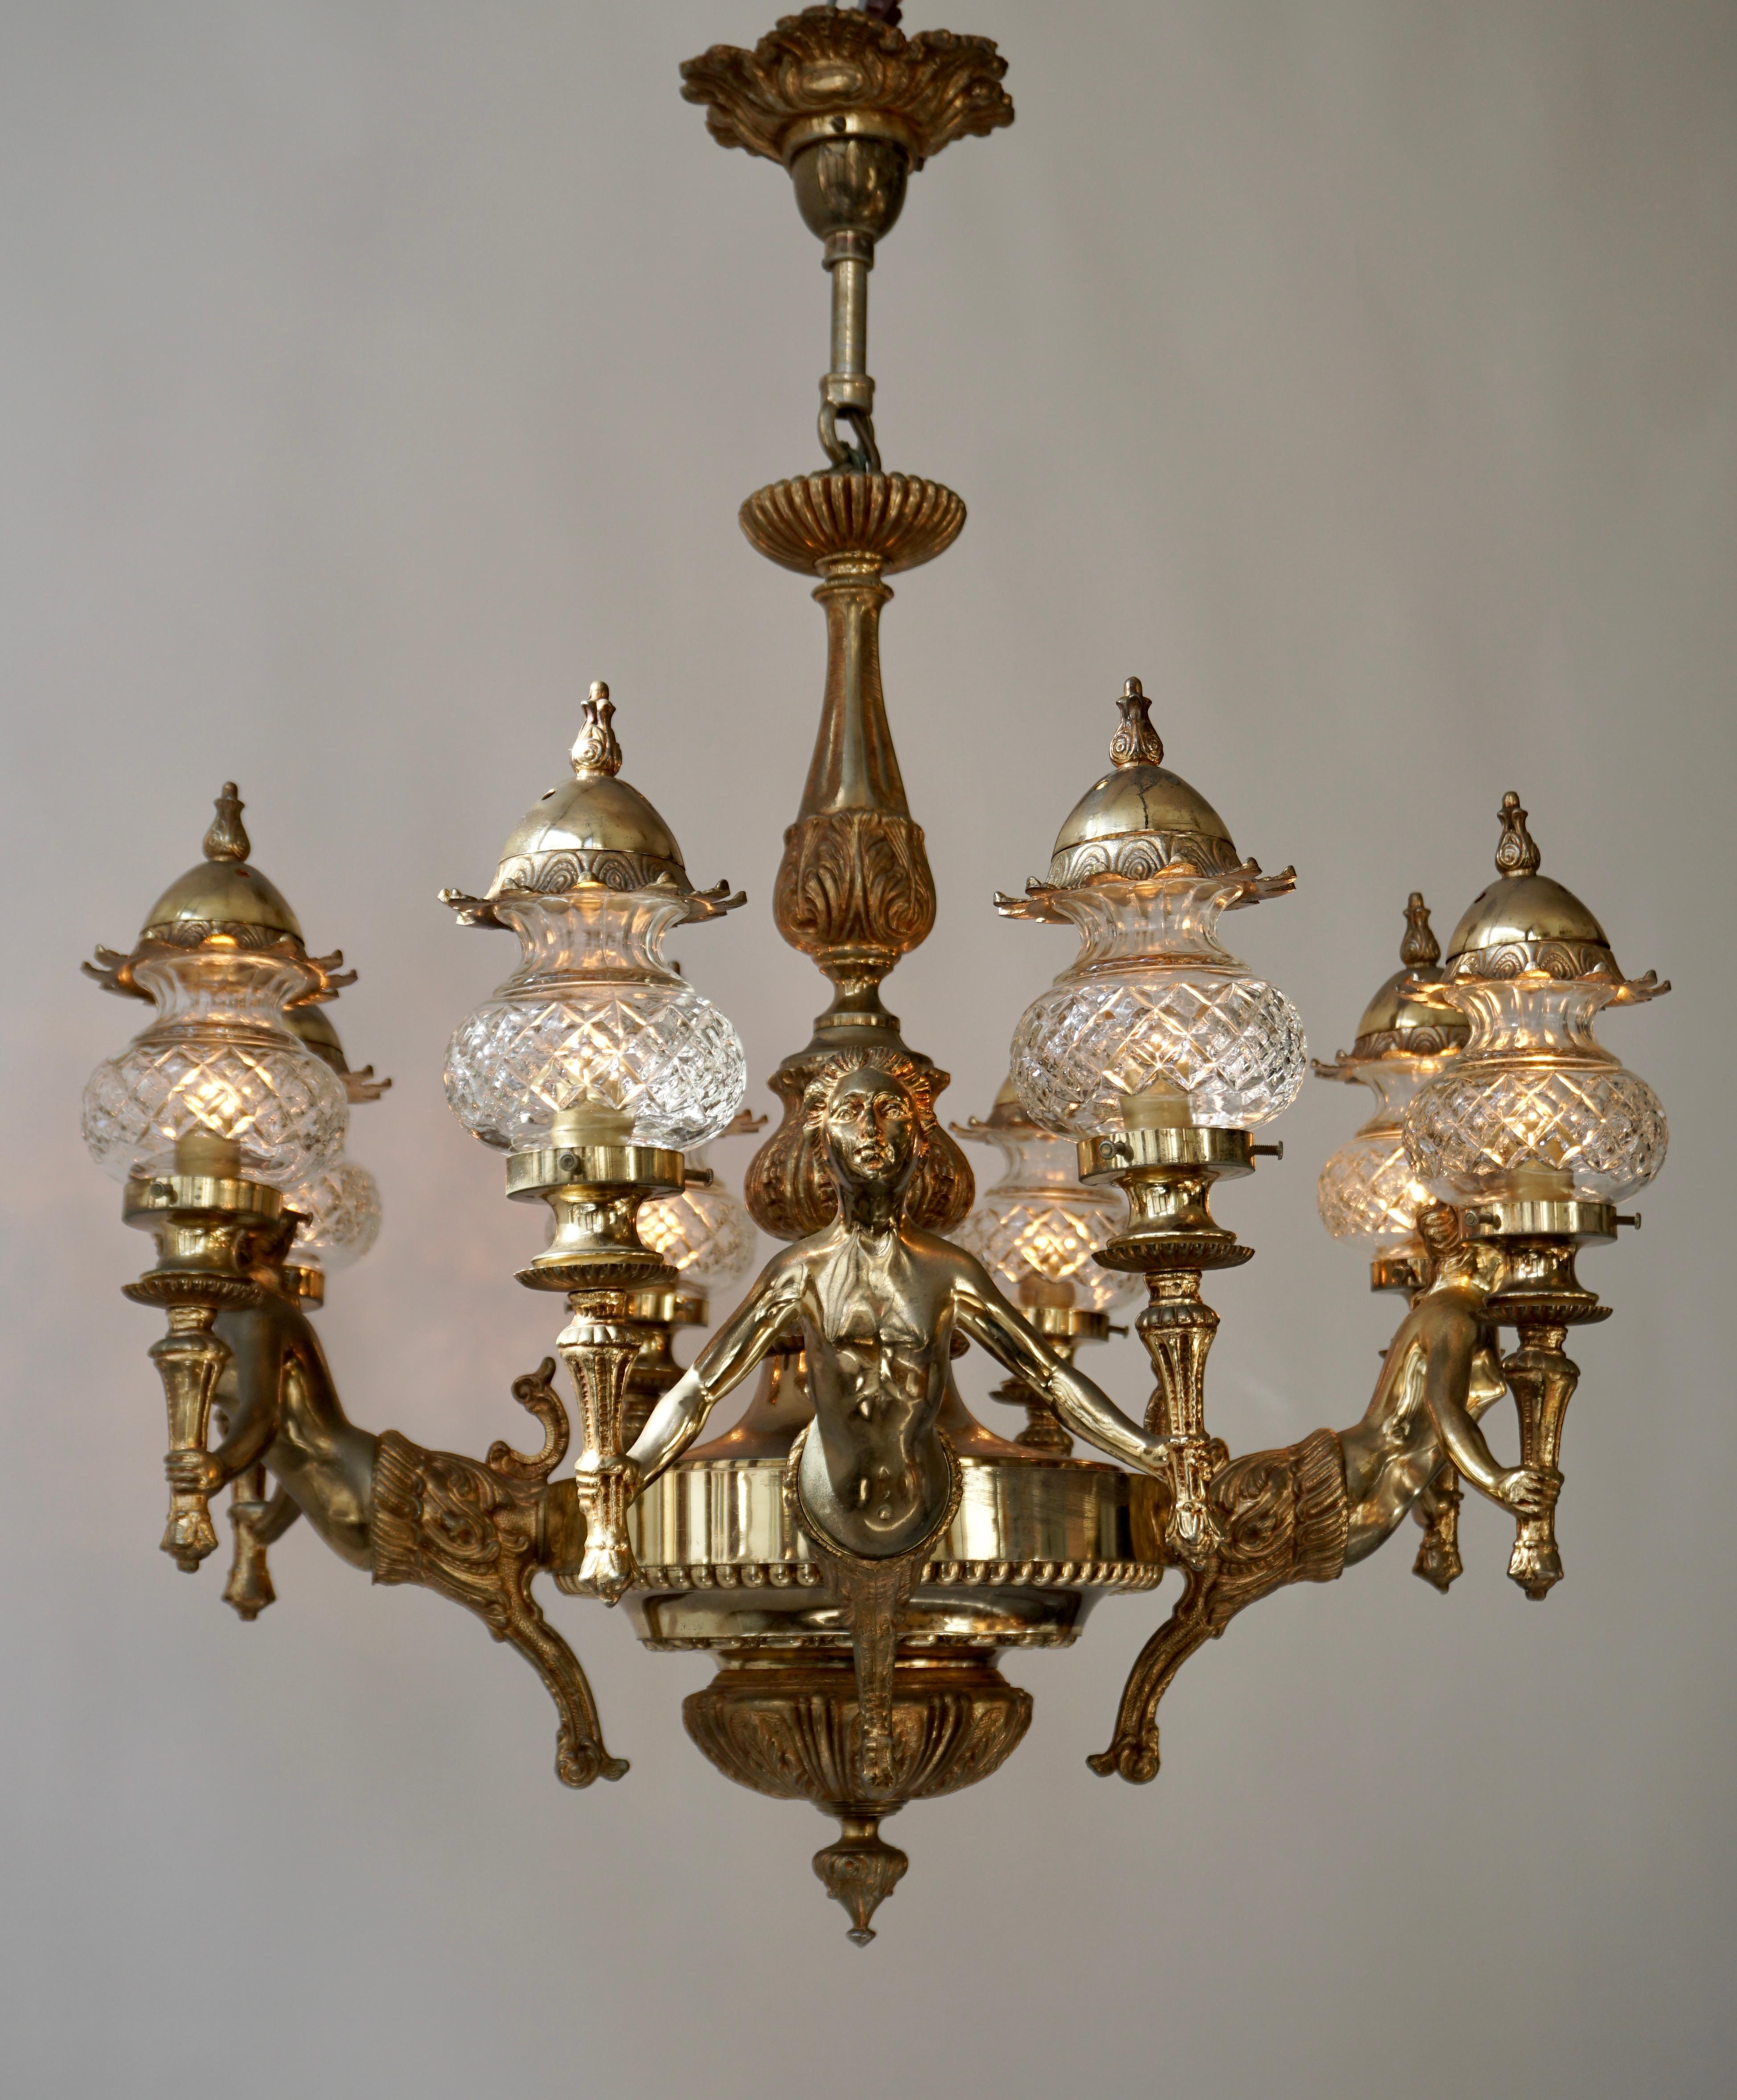 Hollywood Regency French Large Bronze Chandelier with Angels Holding Double Torches